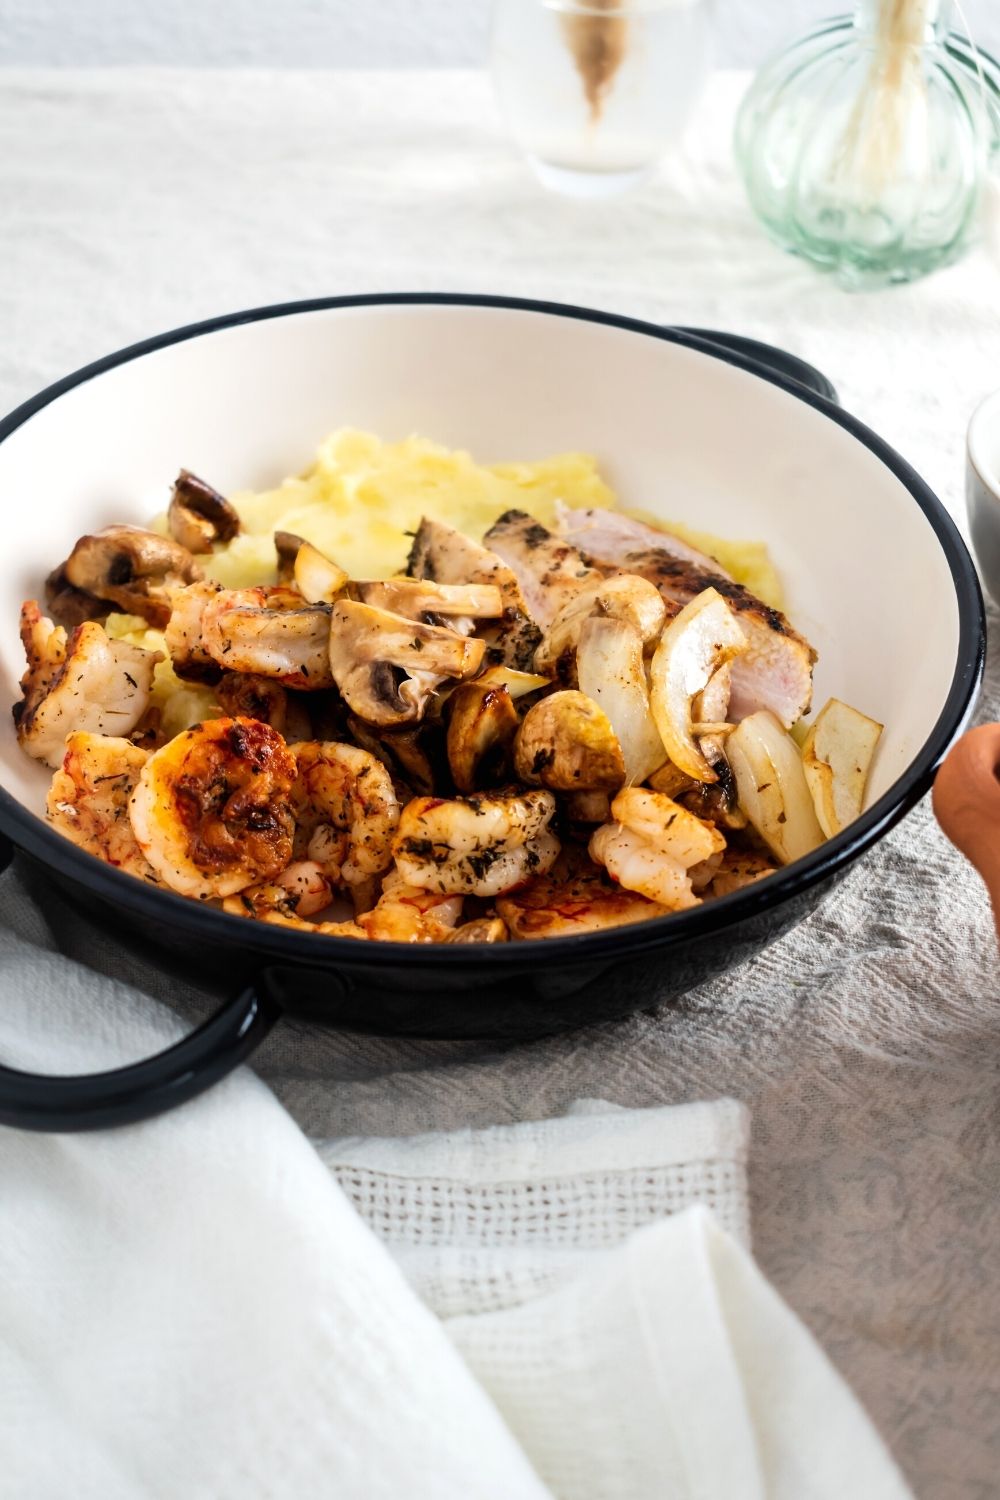 A bowl filled with grilled chicken, shrimp, mushrooms, and potato purée on a gray tablecloth.